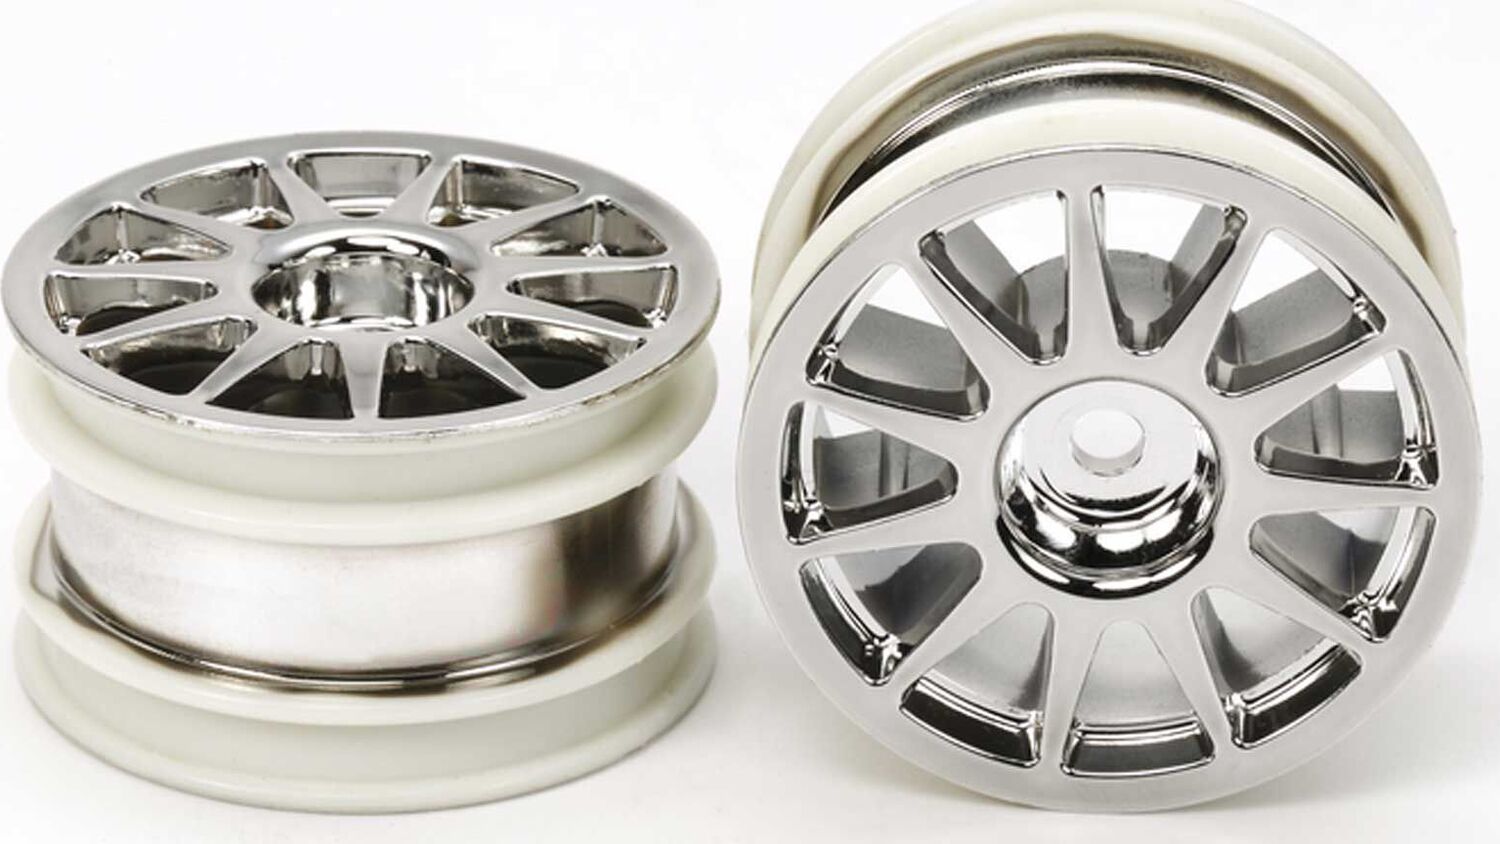 1/10 M-Chassis 11-Spoke Front/Rear Wheel, Chrome Plated (2)